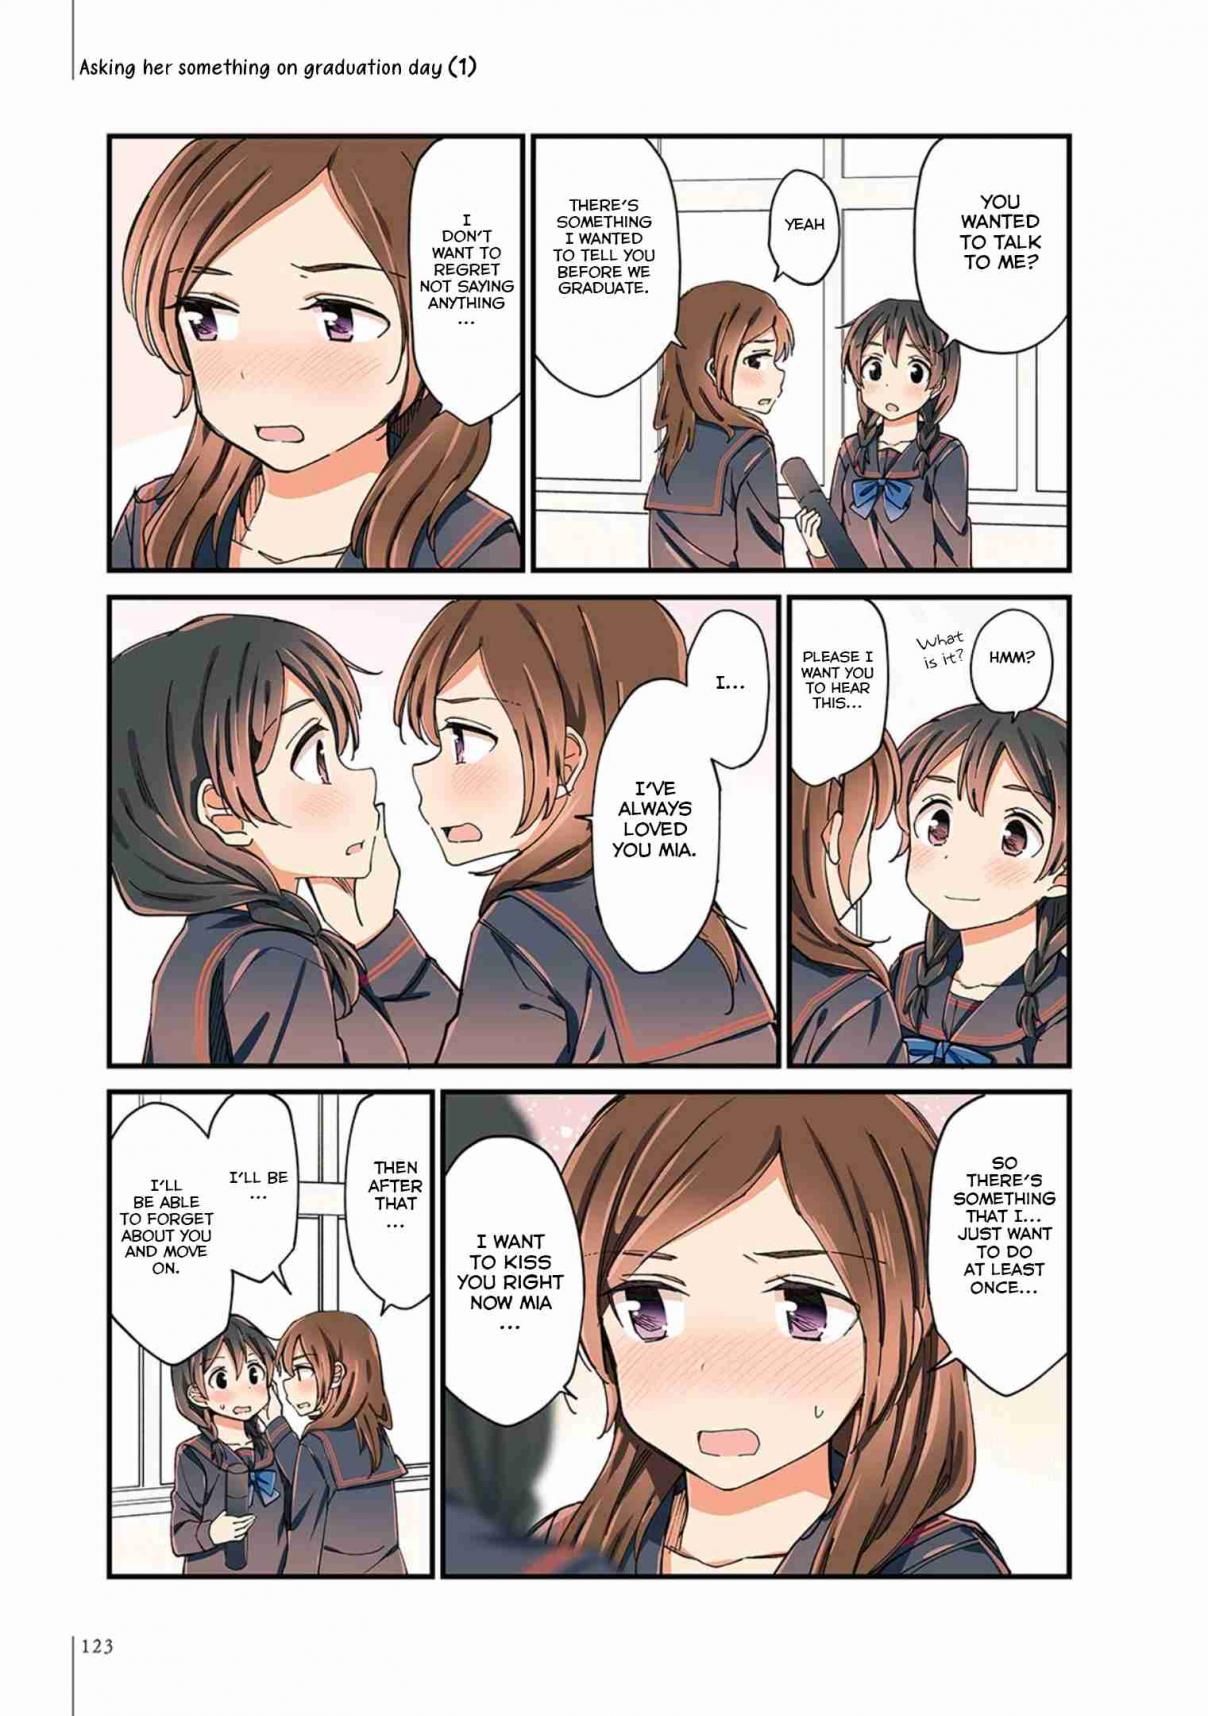 A Hundred Scenes of Girls Love Vol. 2 Ch. 18 March